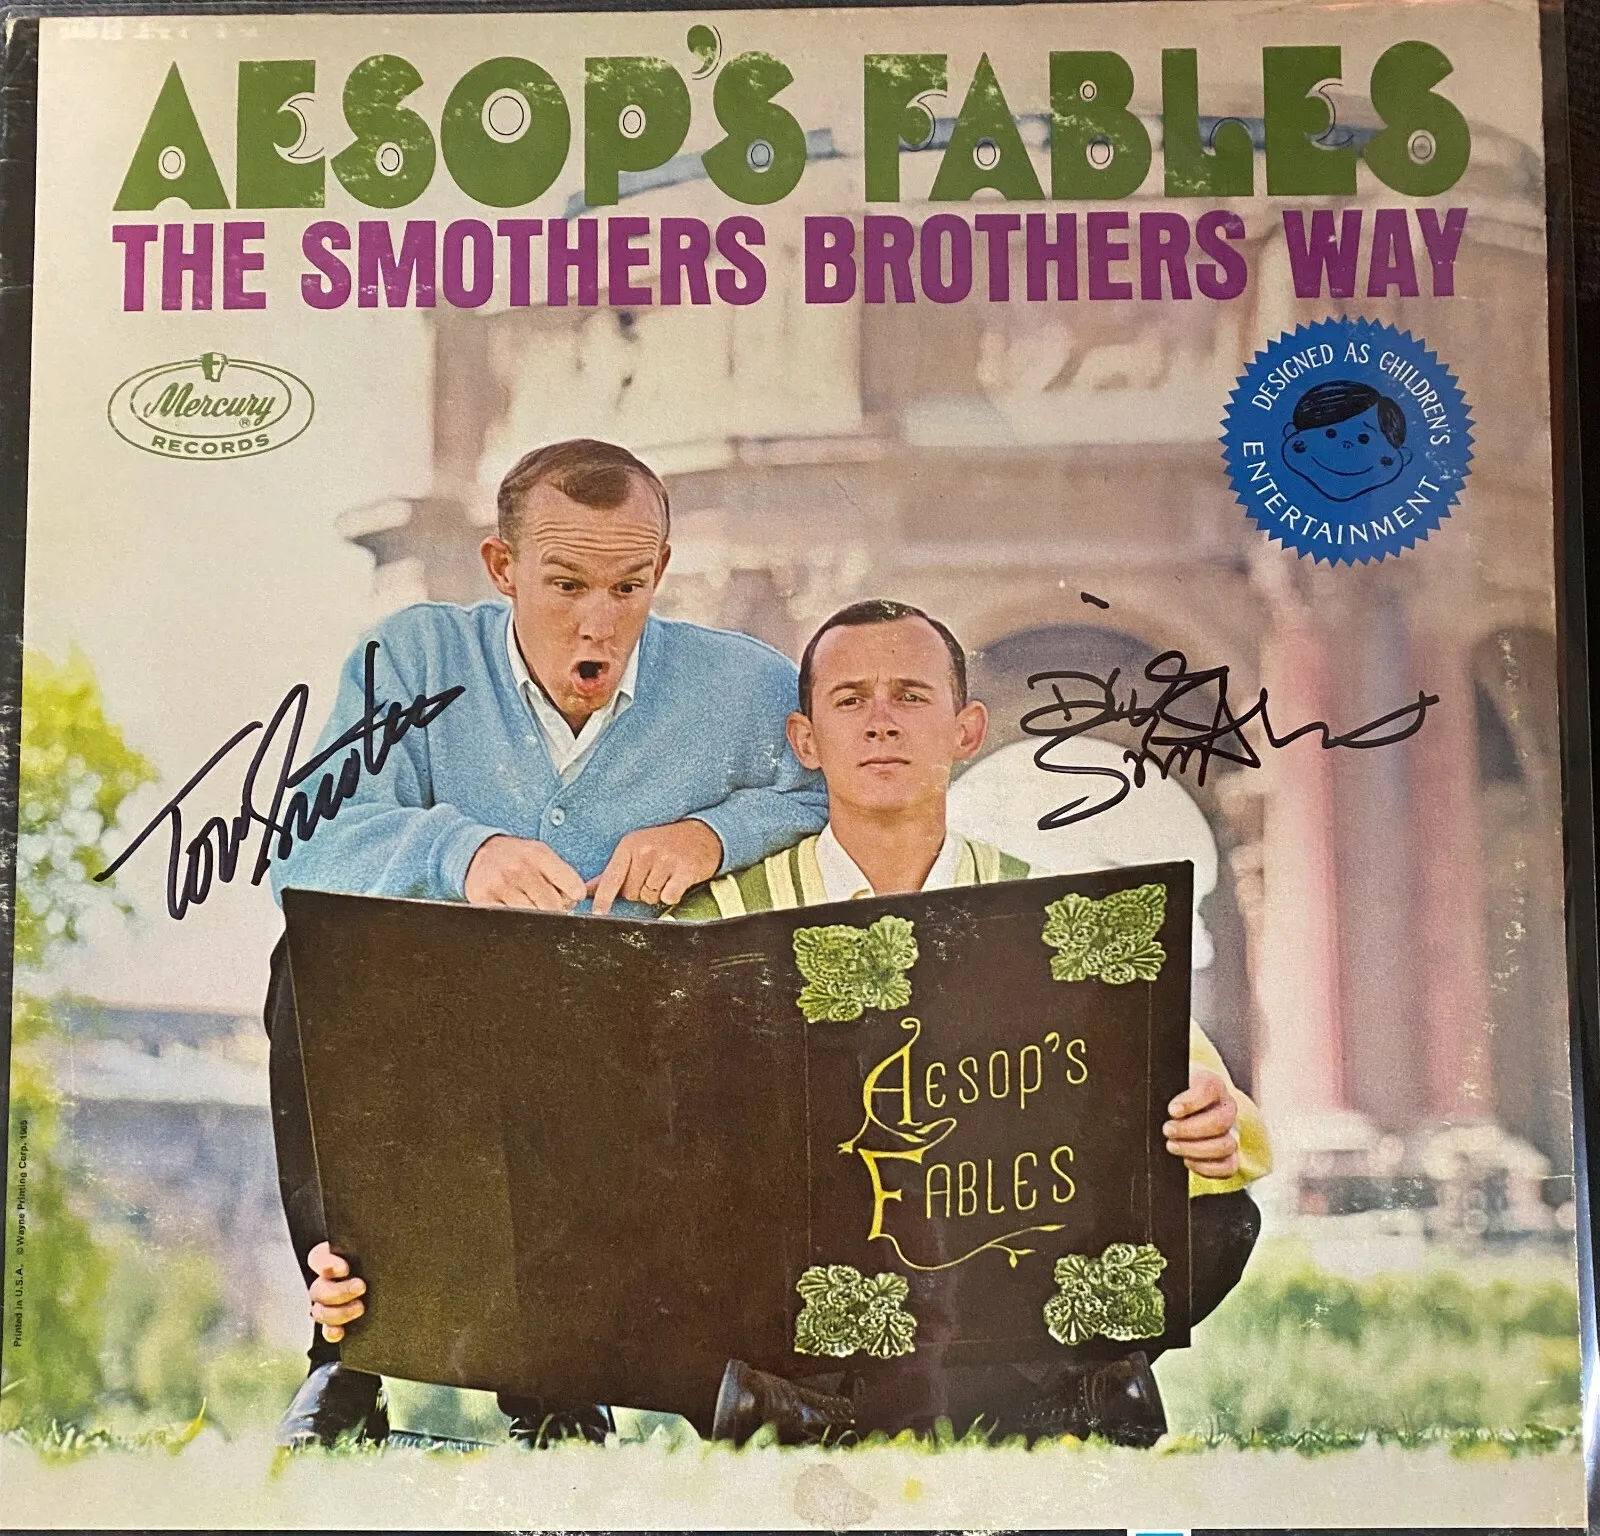 THE SMOTHERS BROTHERS PERFECTLY HAND- SIGNED ALBUM COVER. THE BEST ON EBAY!